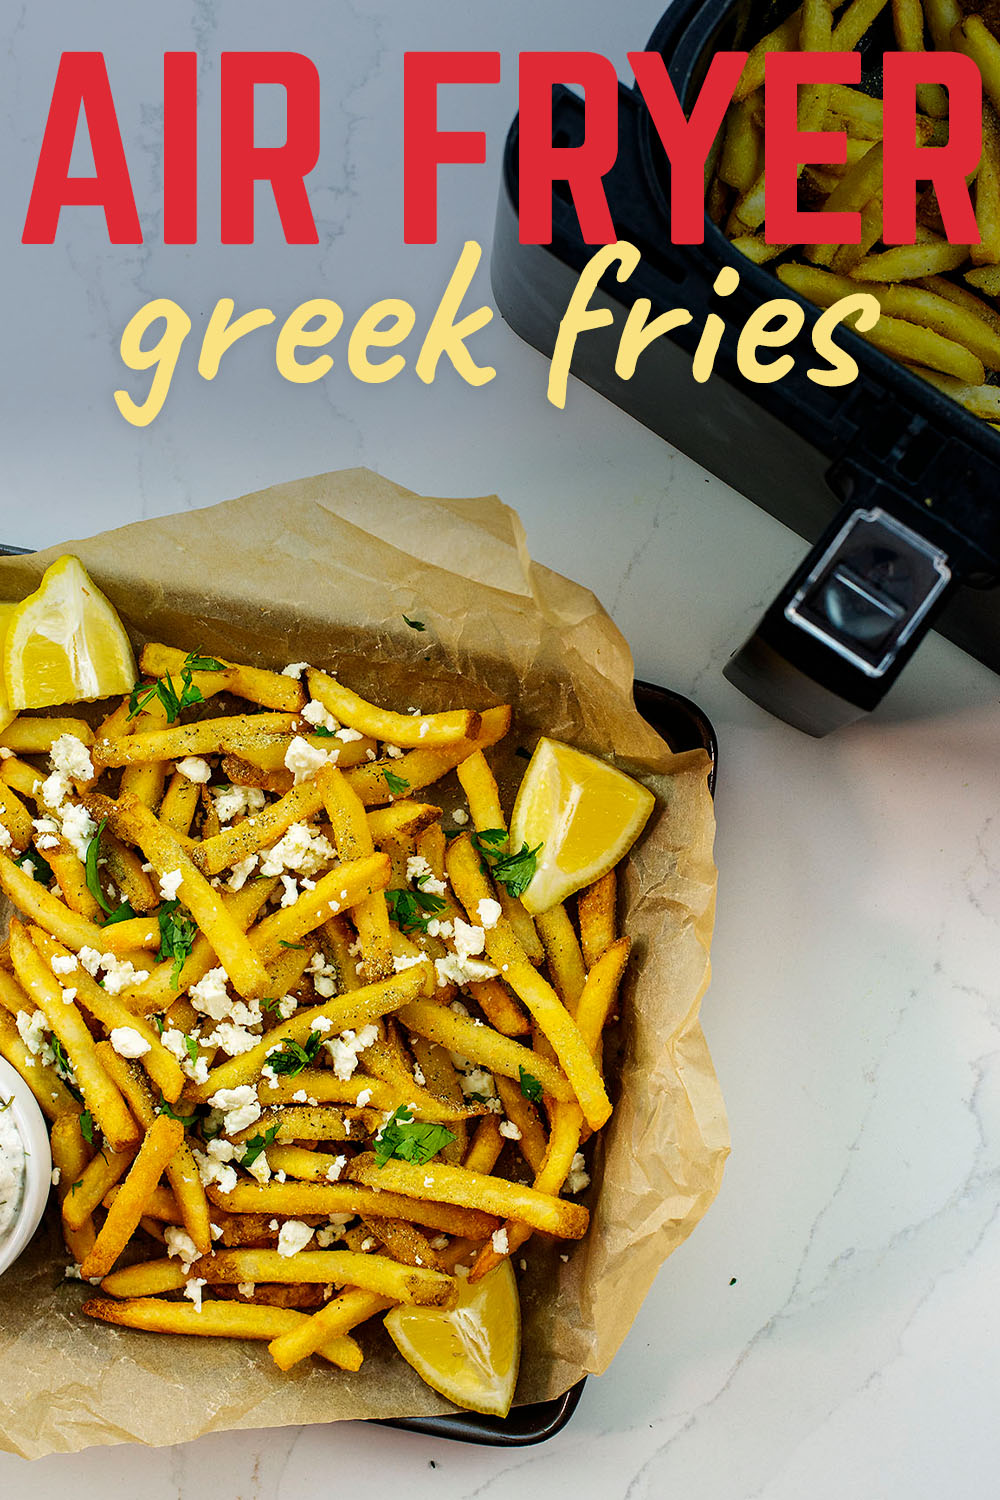 These air fried fries are packed with Greek flavors and then I dipped them in tzatziki sauce!